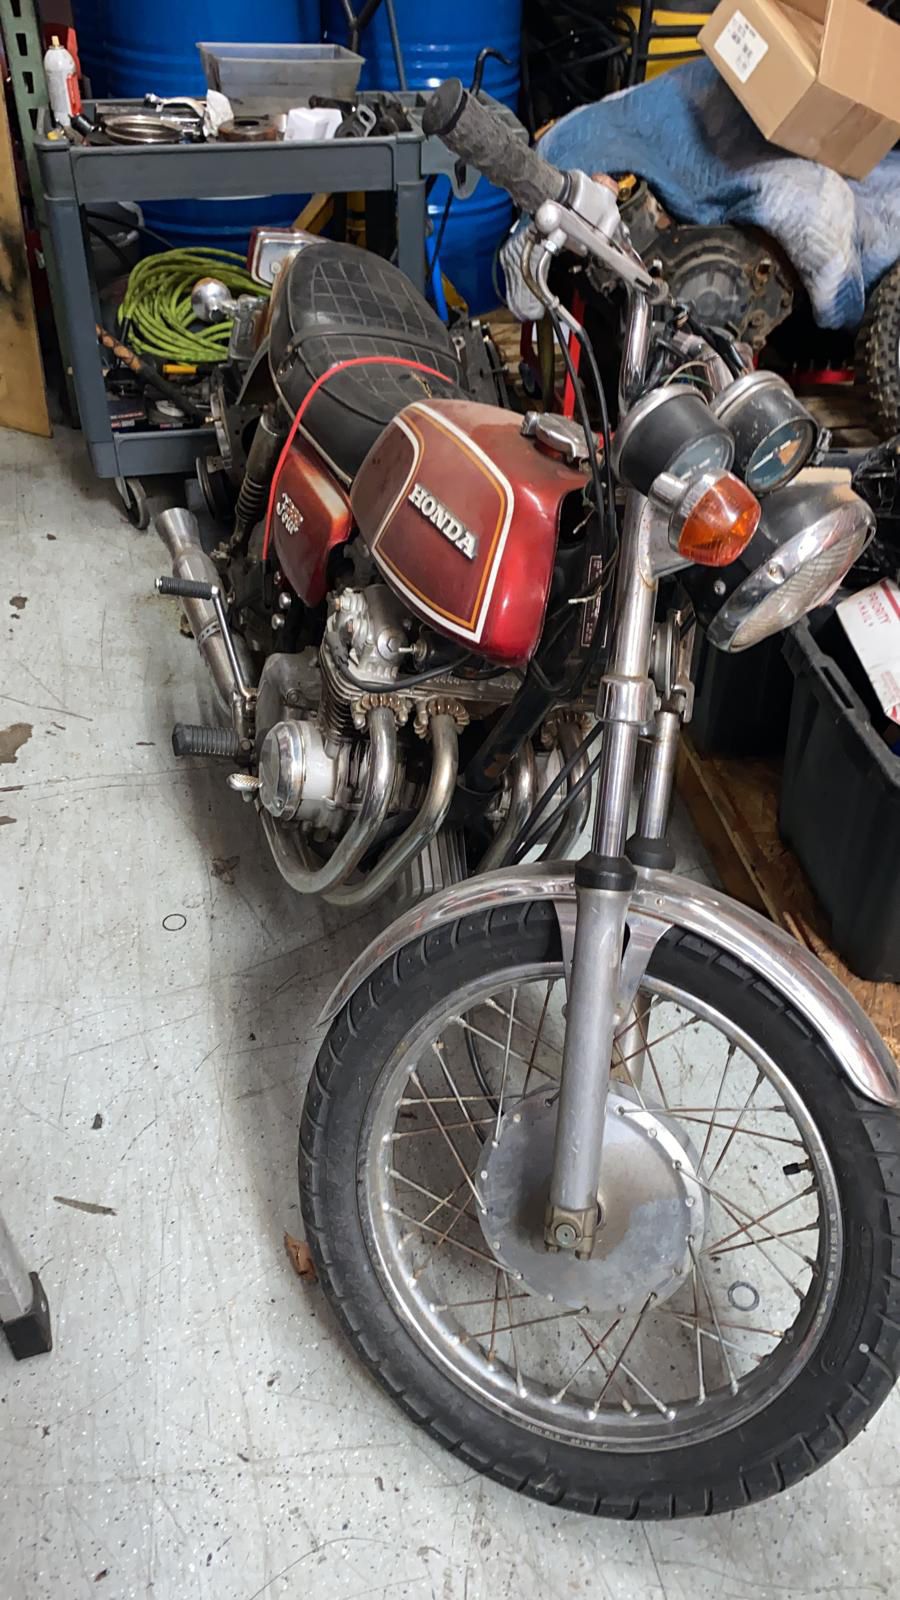 1973 Ch350 4 Cylinder W Title And On Nonopp